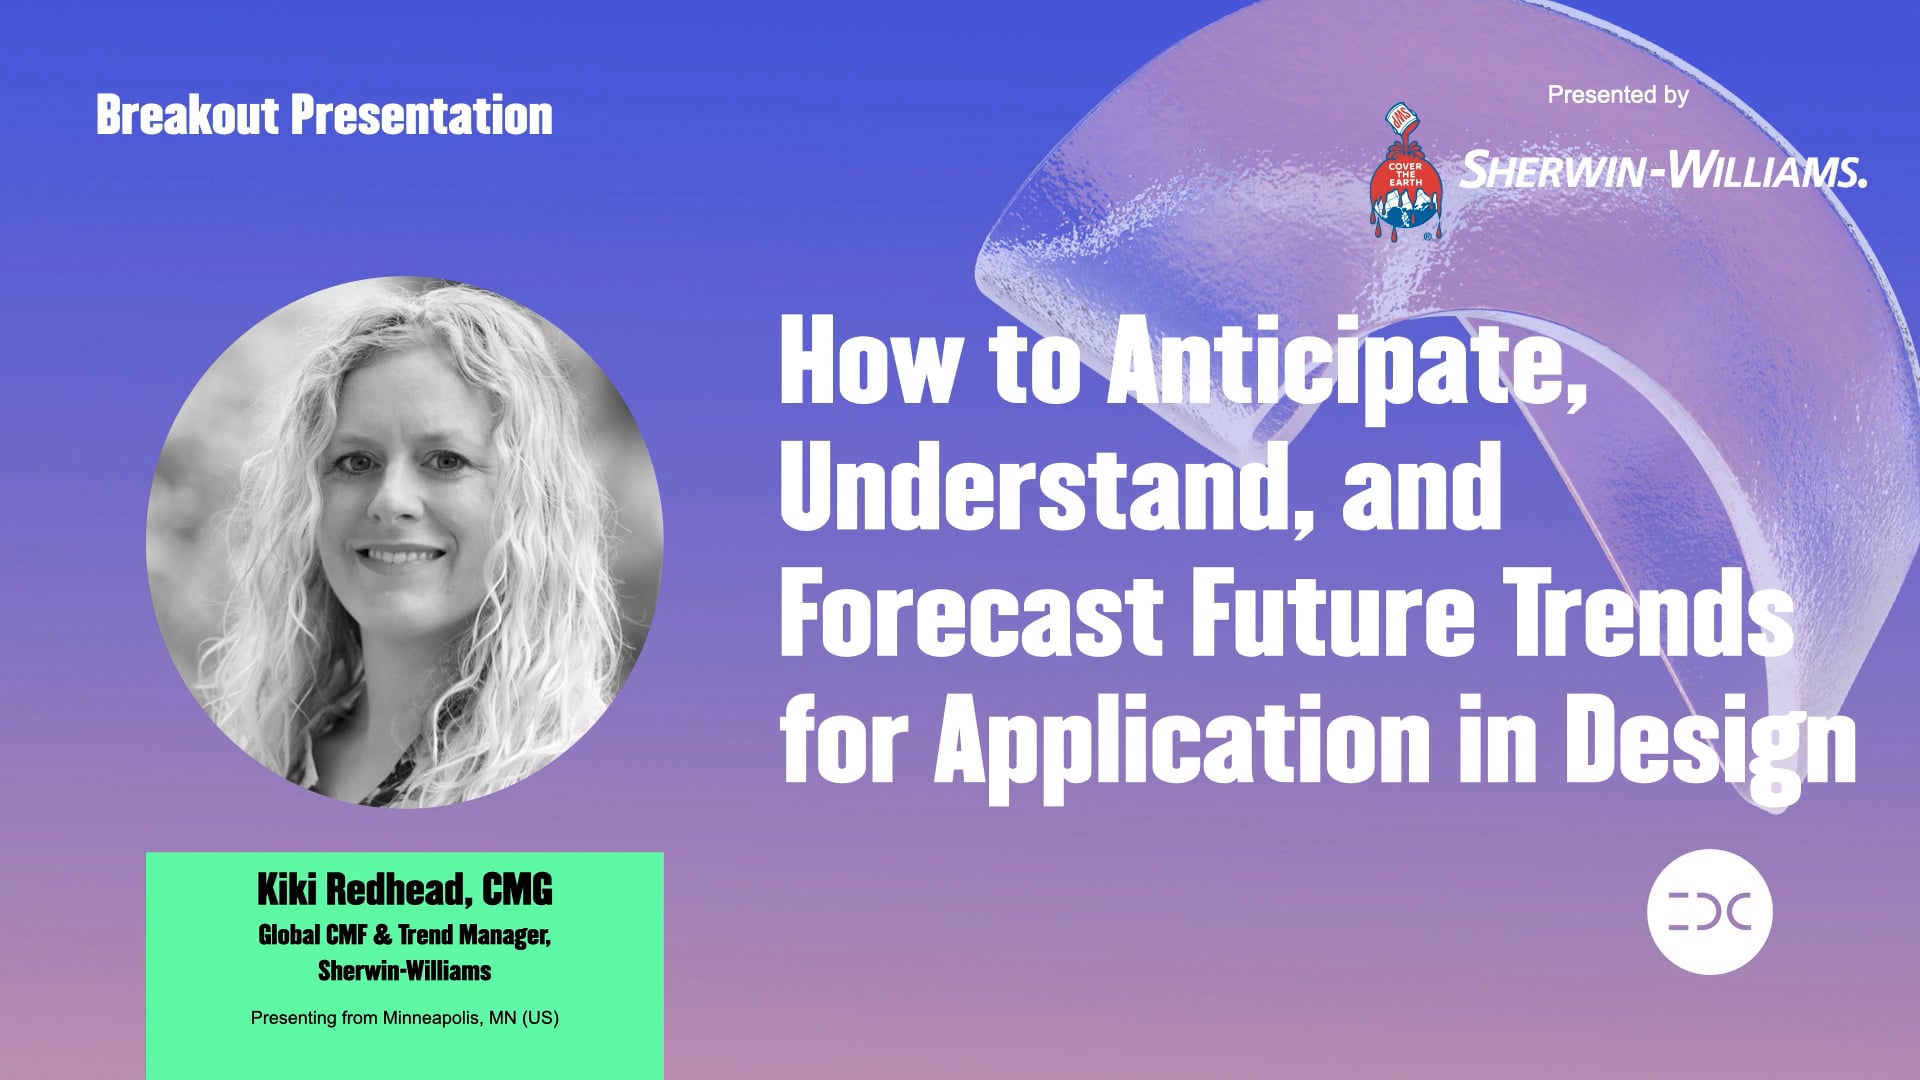 IDC 2021 - Kiki Redhead - How to Anticipate, Understand, and Forecast Future Trends for Application in Design